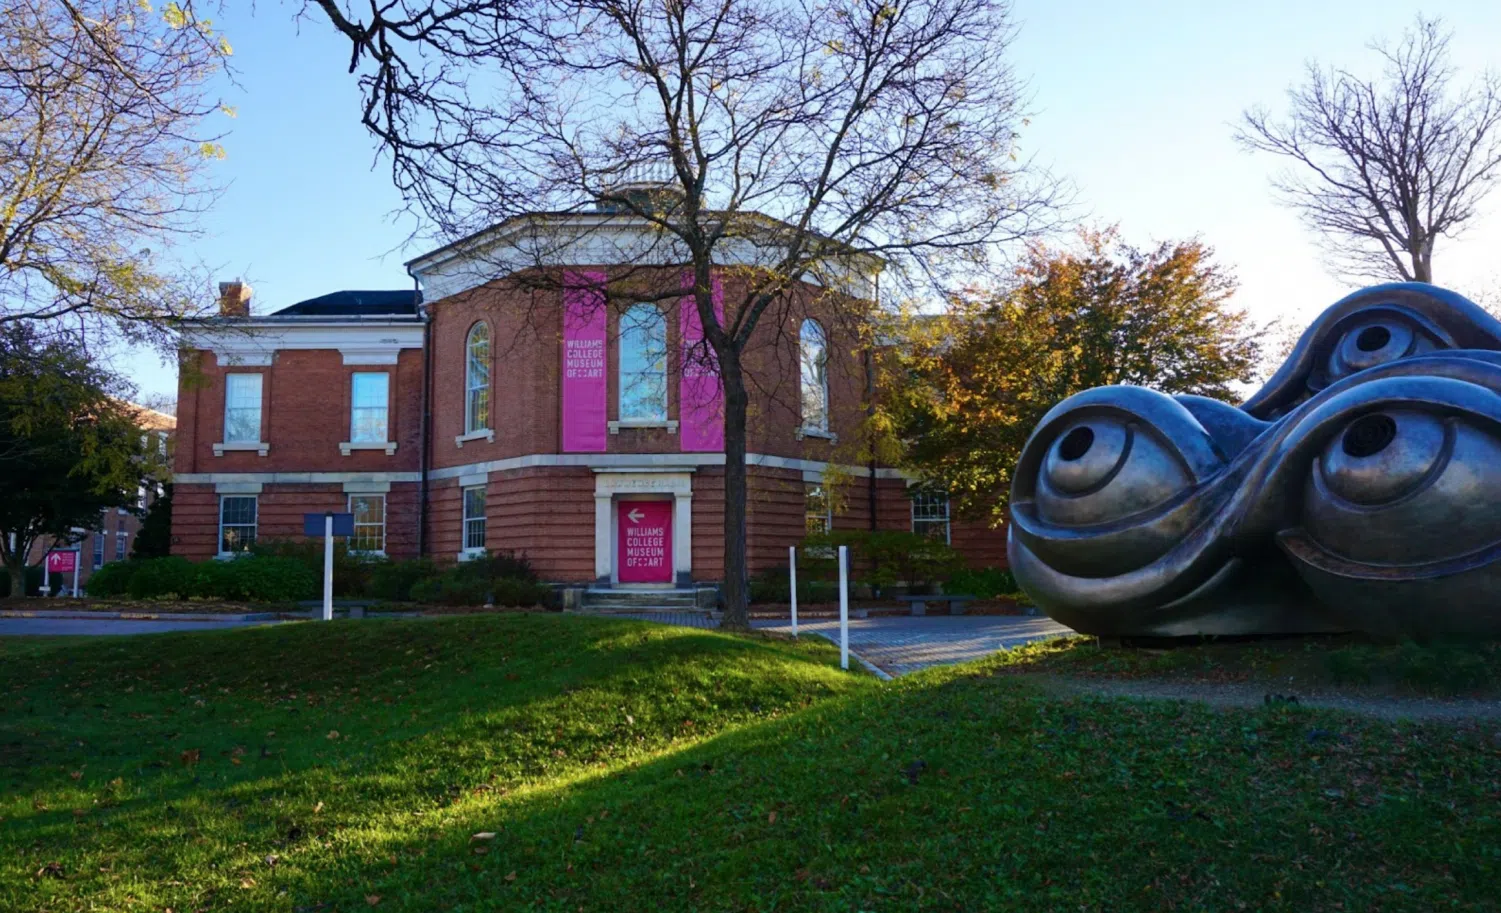 The Williams College Museum of Art, a rounded red brick building, with a sidewalk and grass in front of it, and a sculpture of eyes.